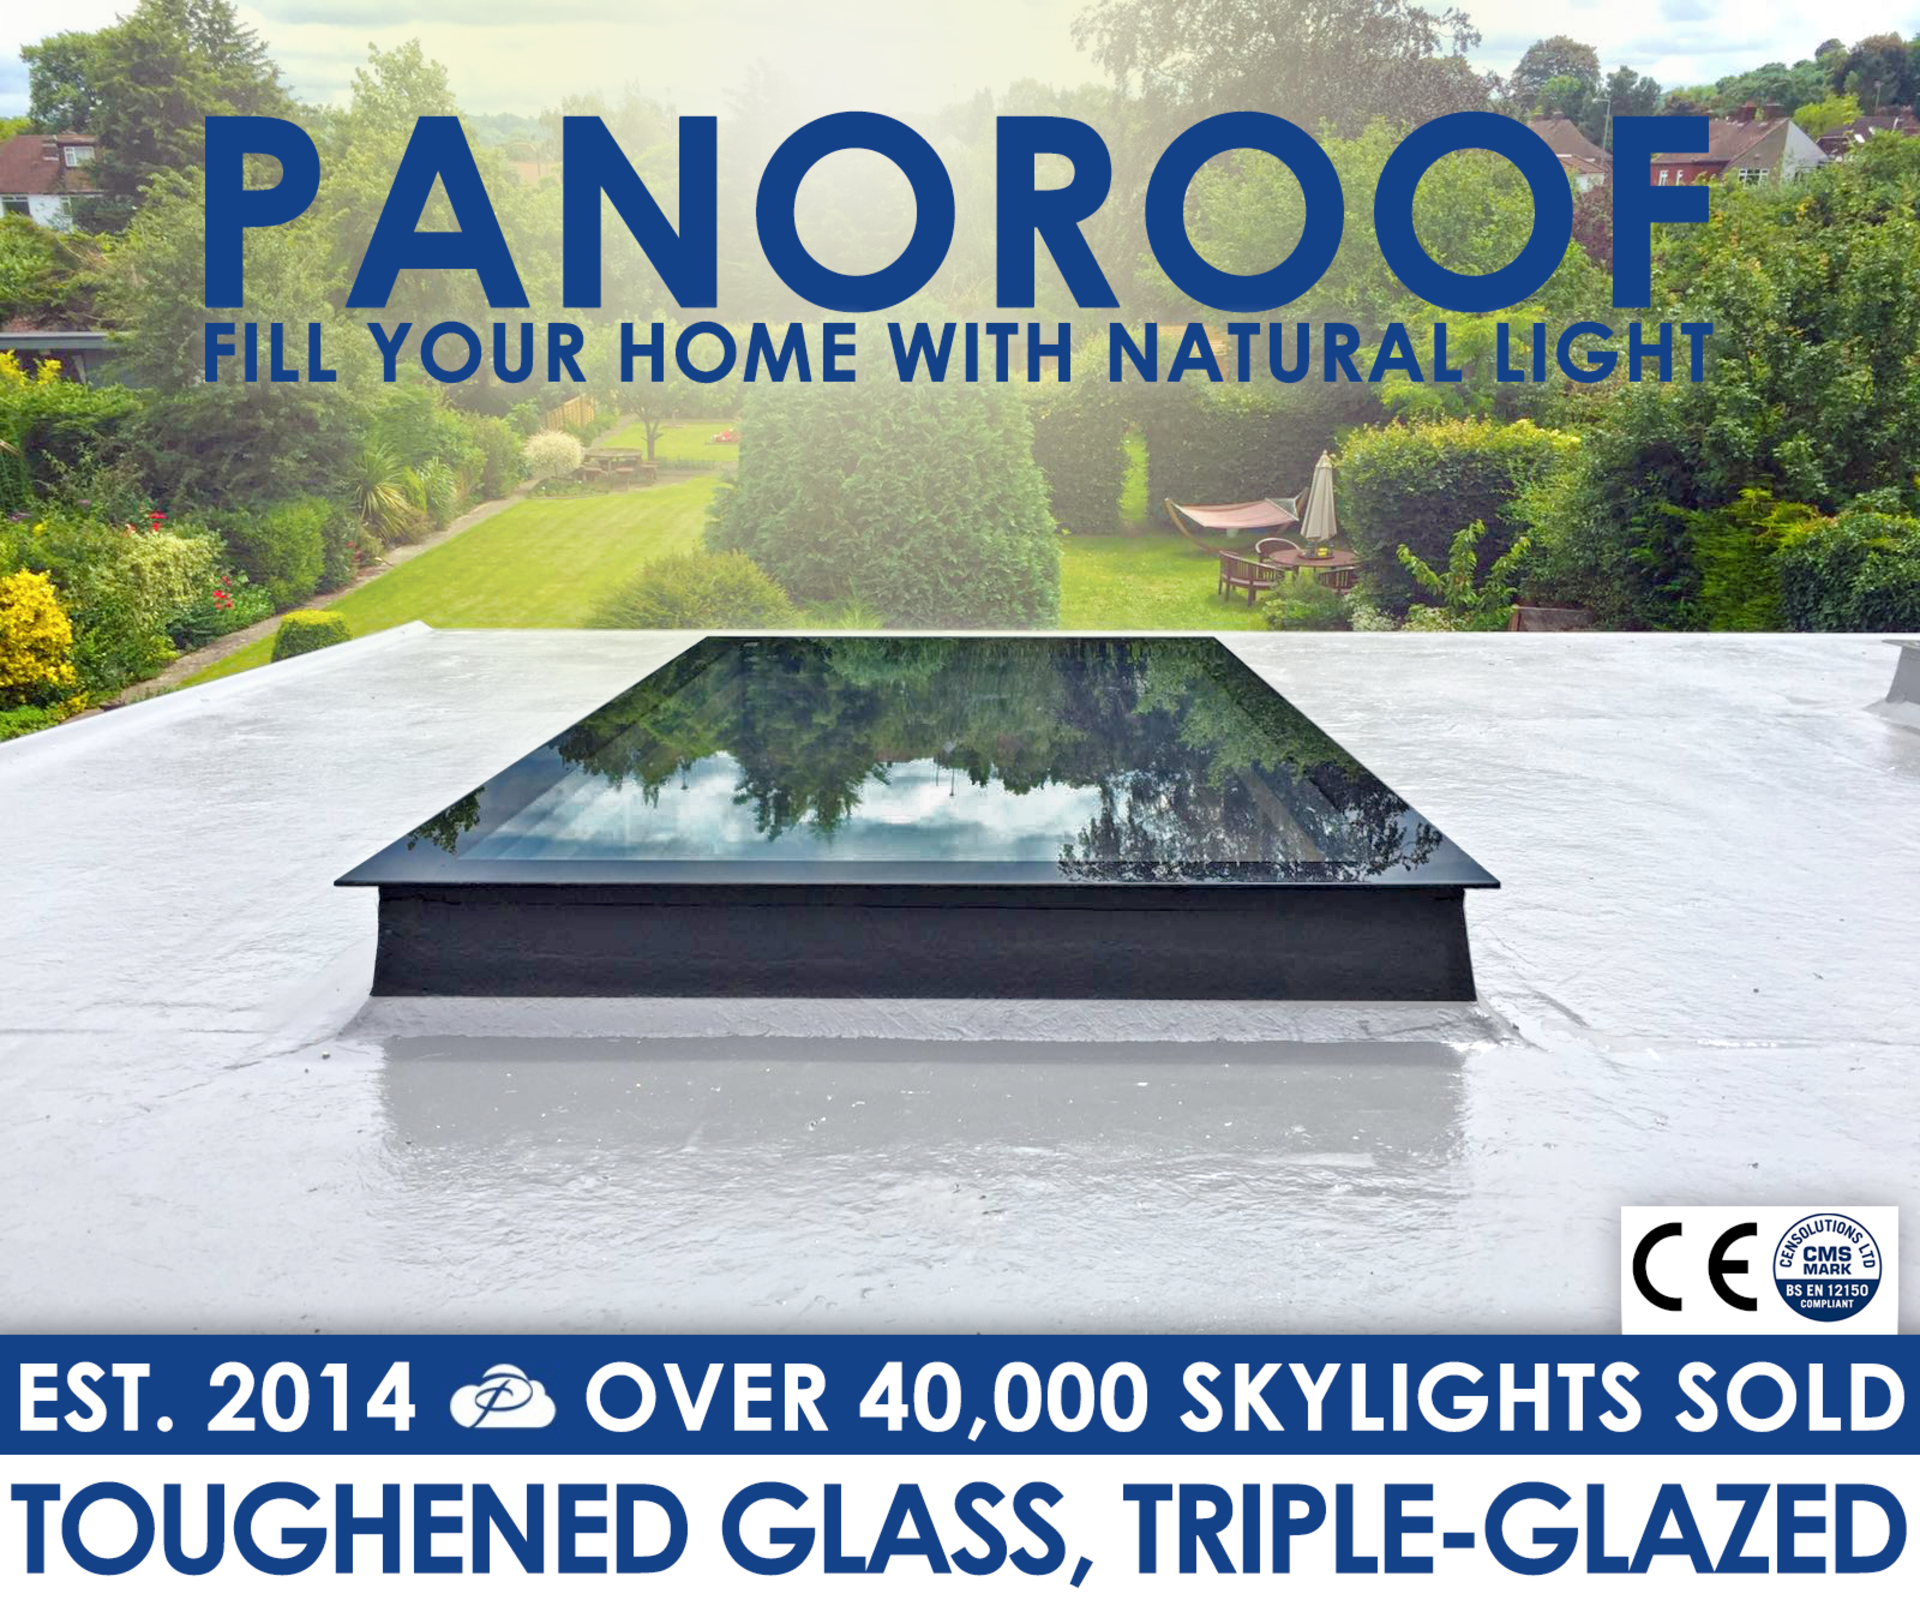 Panoroof 1500x2500mm (inside Size Visable glass area) Seamless Glass Skylight Flat Roof Rooflight